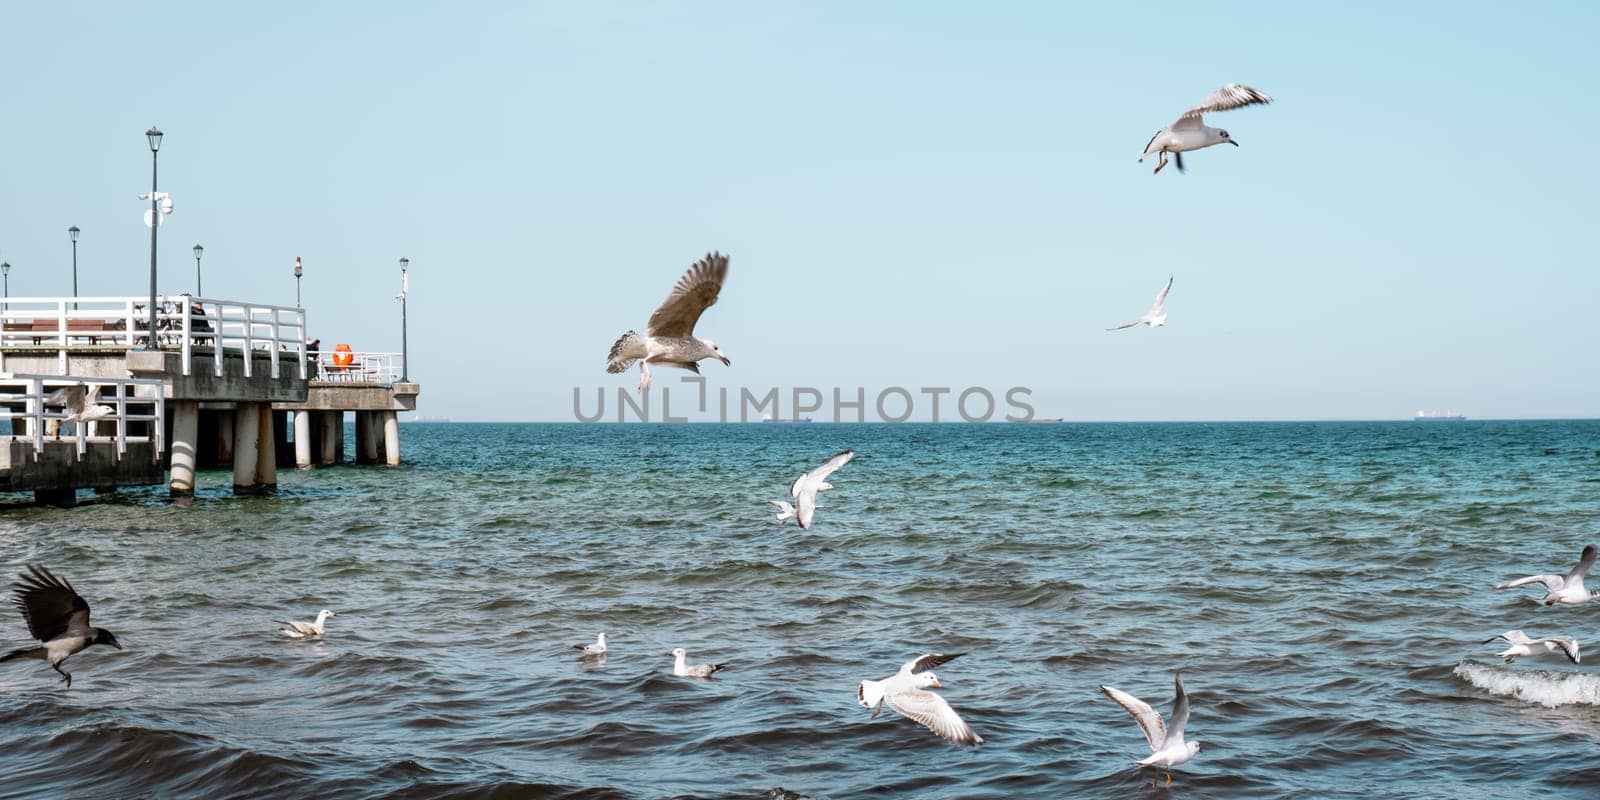 The Sopot molo pier longest in Europe. Baltic Sea and the sun. Seagulls flying on the beach of Baltic Sea waves searching food. Gdansk travel destination. Holiday vacation